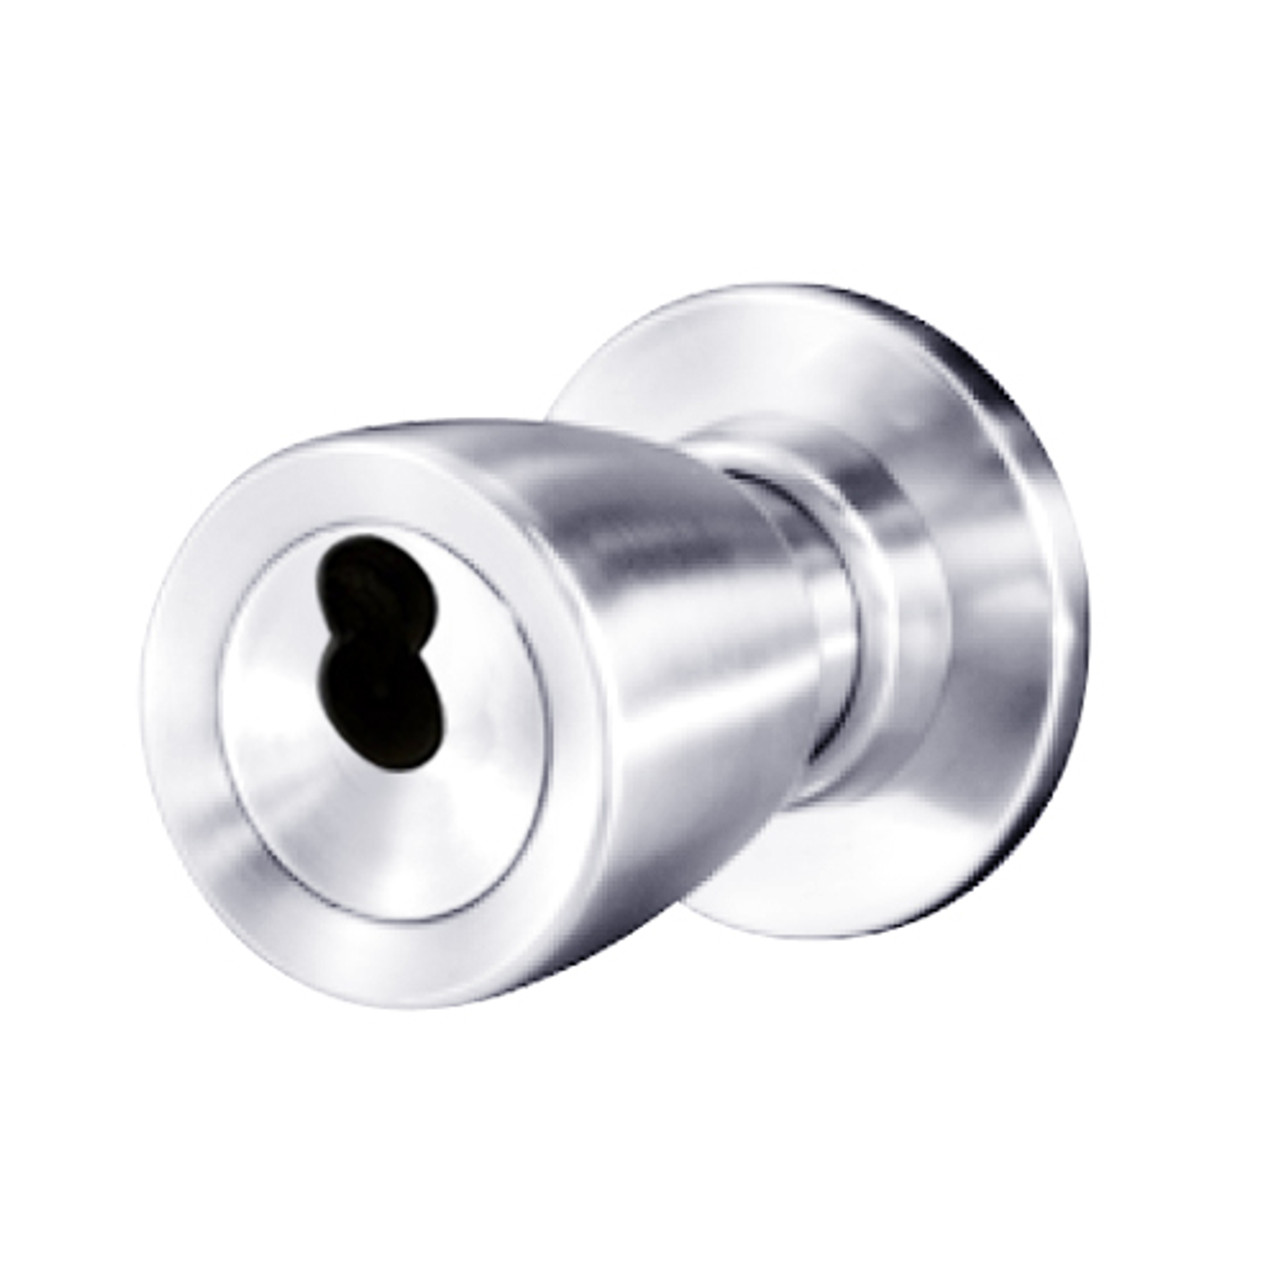 8K37YD6CSTK625 Best 8K Series Exit Heavy Duty Cylindrical Knob Locks with Tulip Style in Bright Chrome